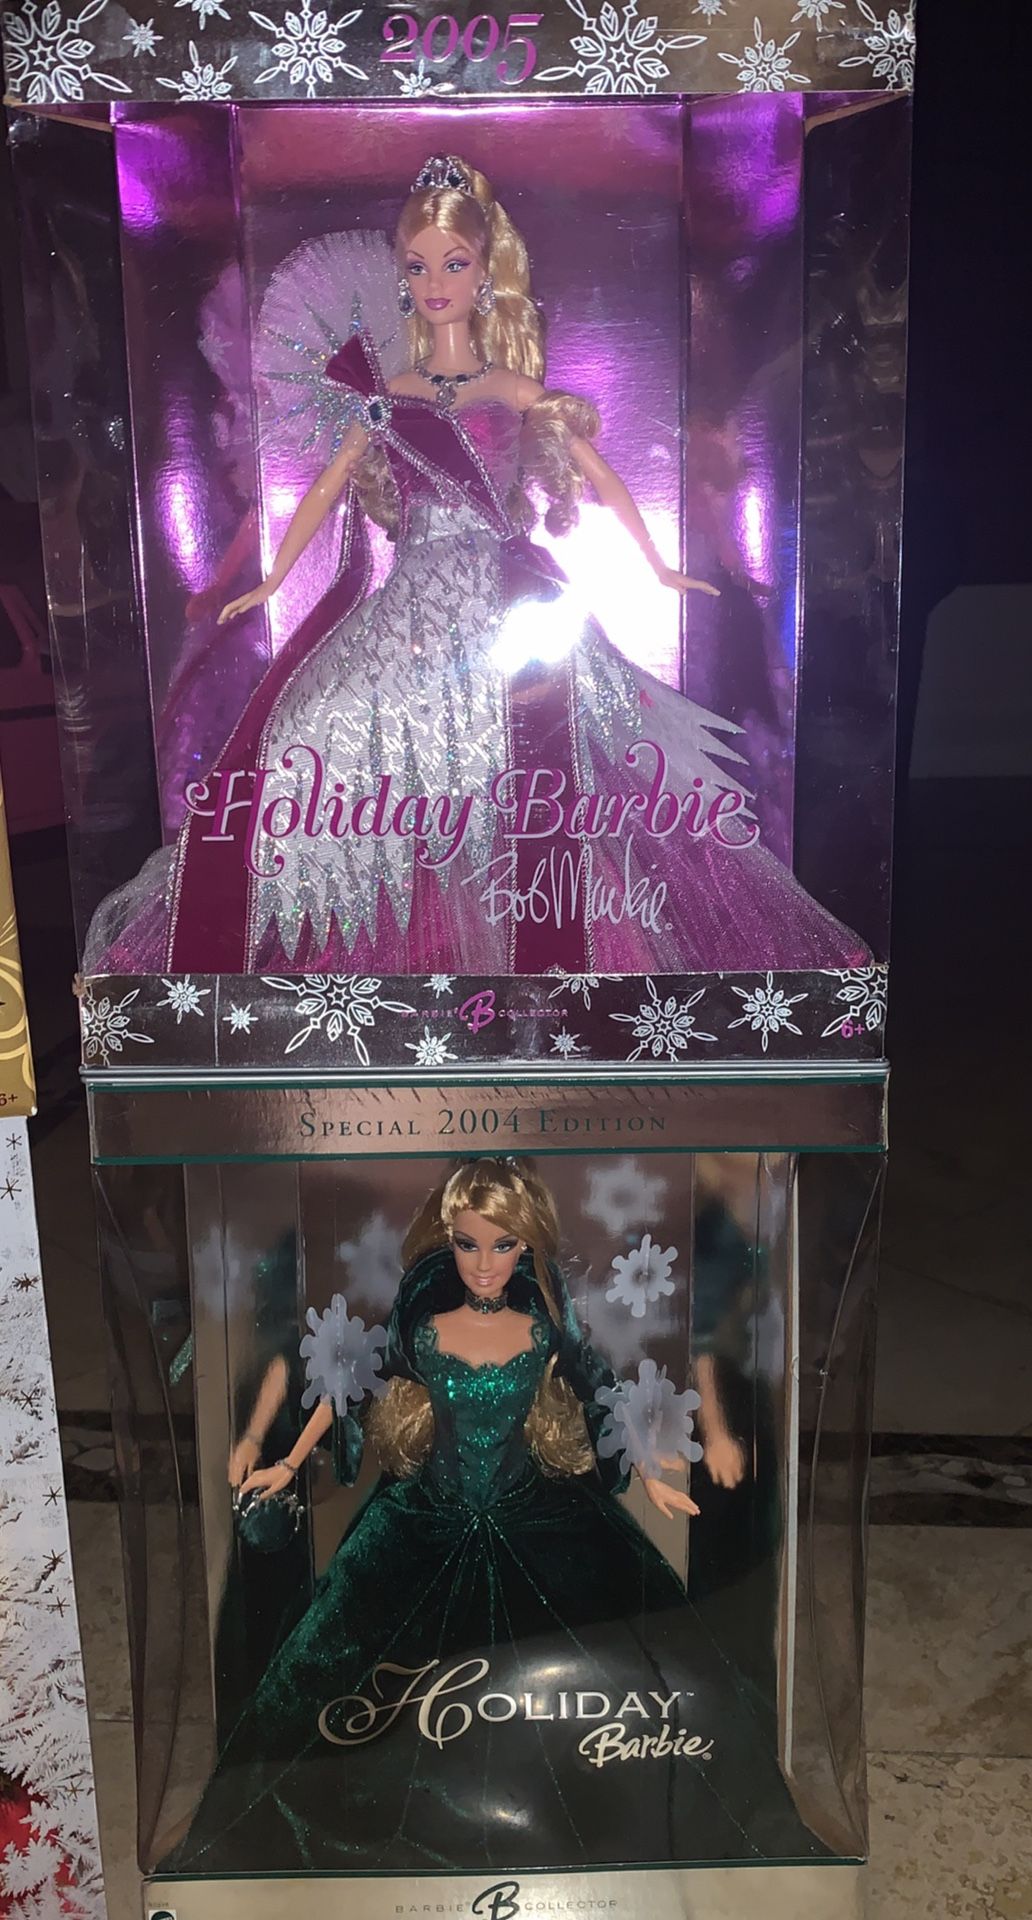 SPECIAL 2004 EDITION Holiday Barbie By Bobmackie